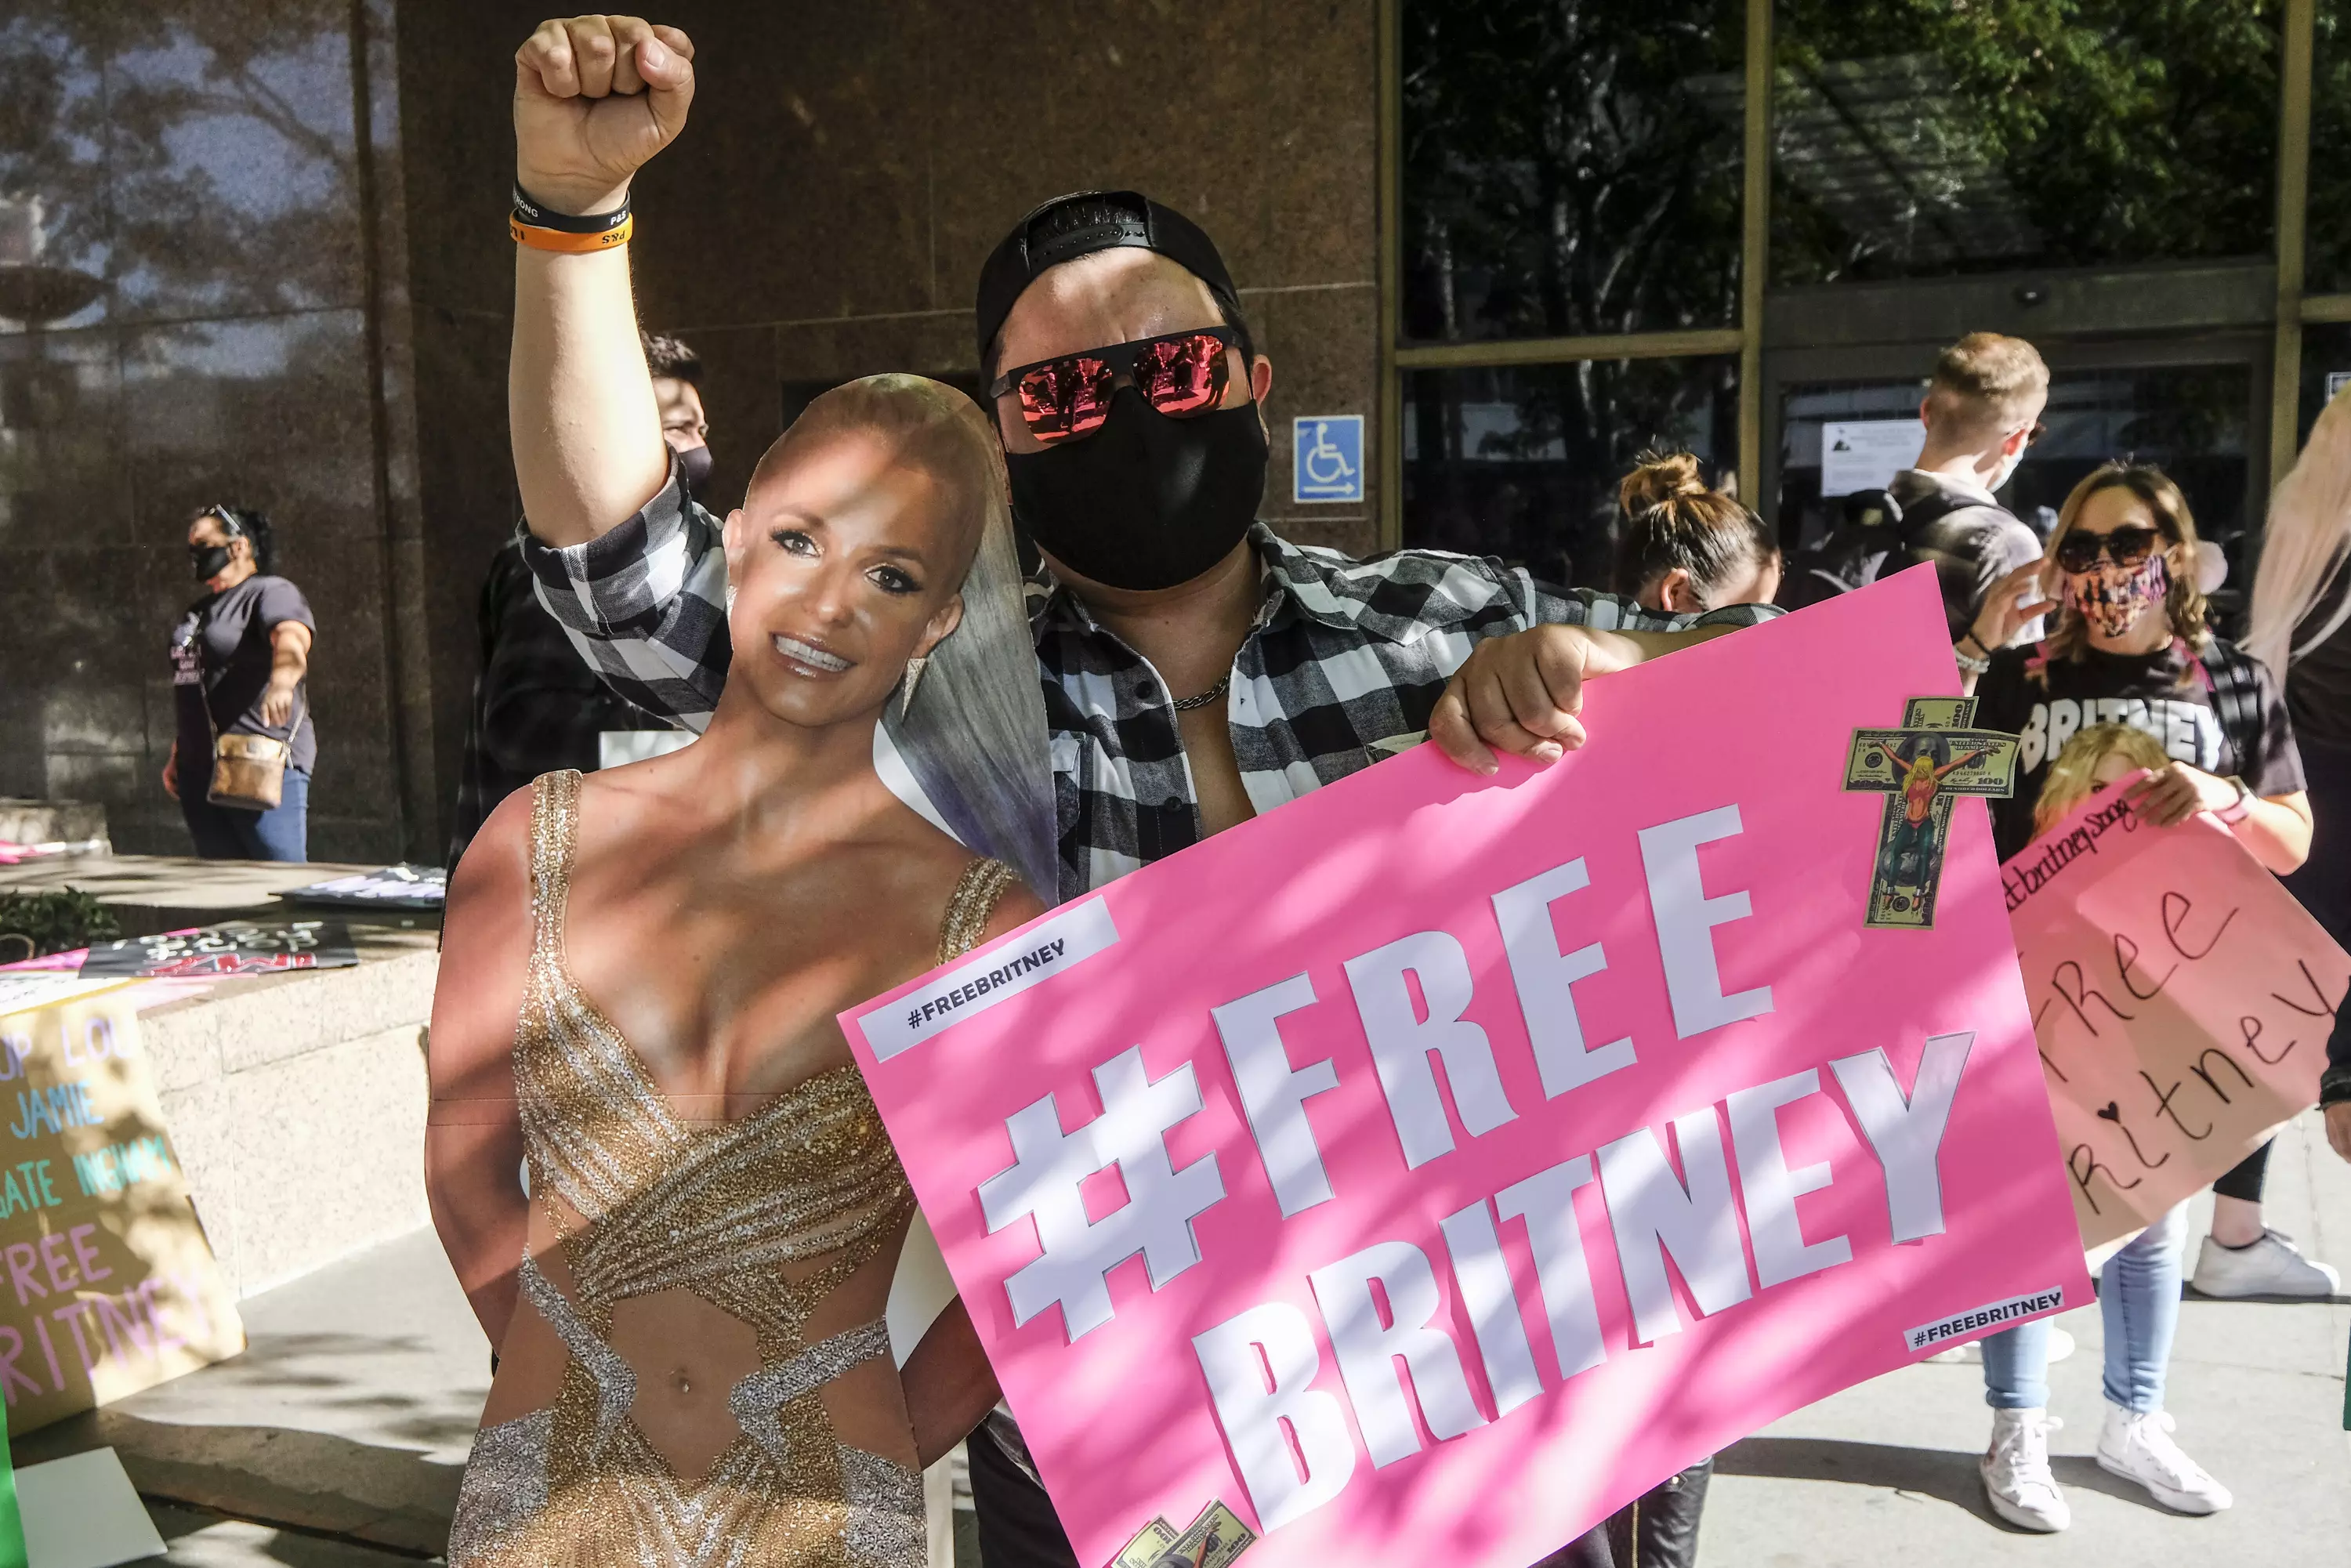 Mobeen will look at the passionate #FreeBritney movement (